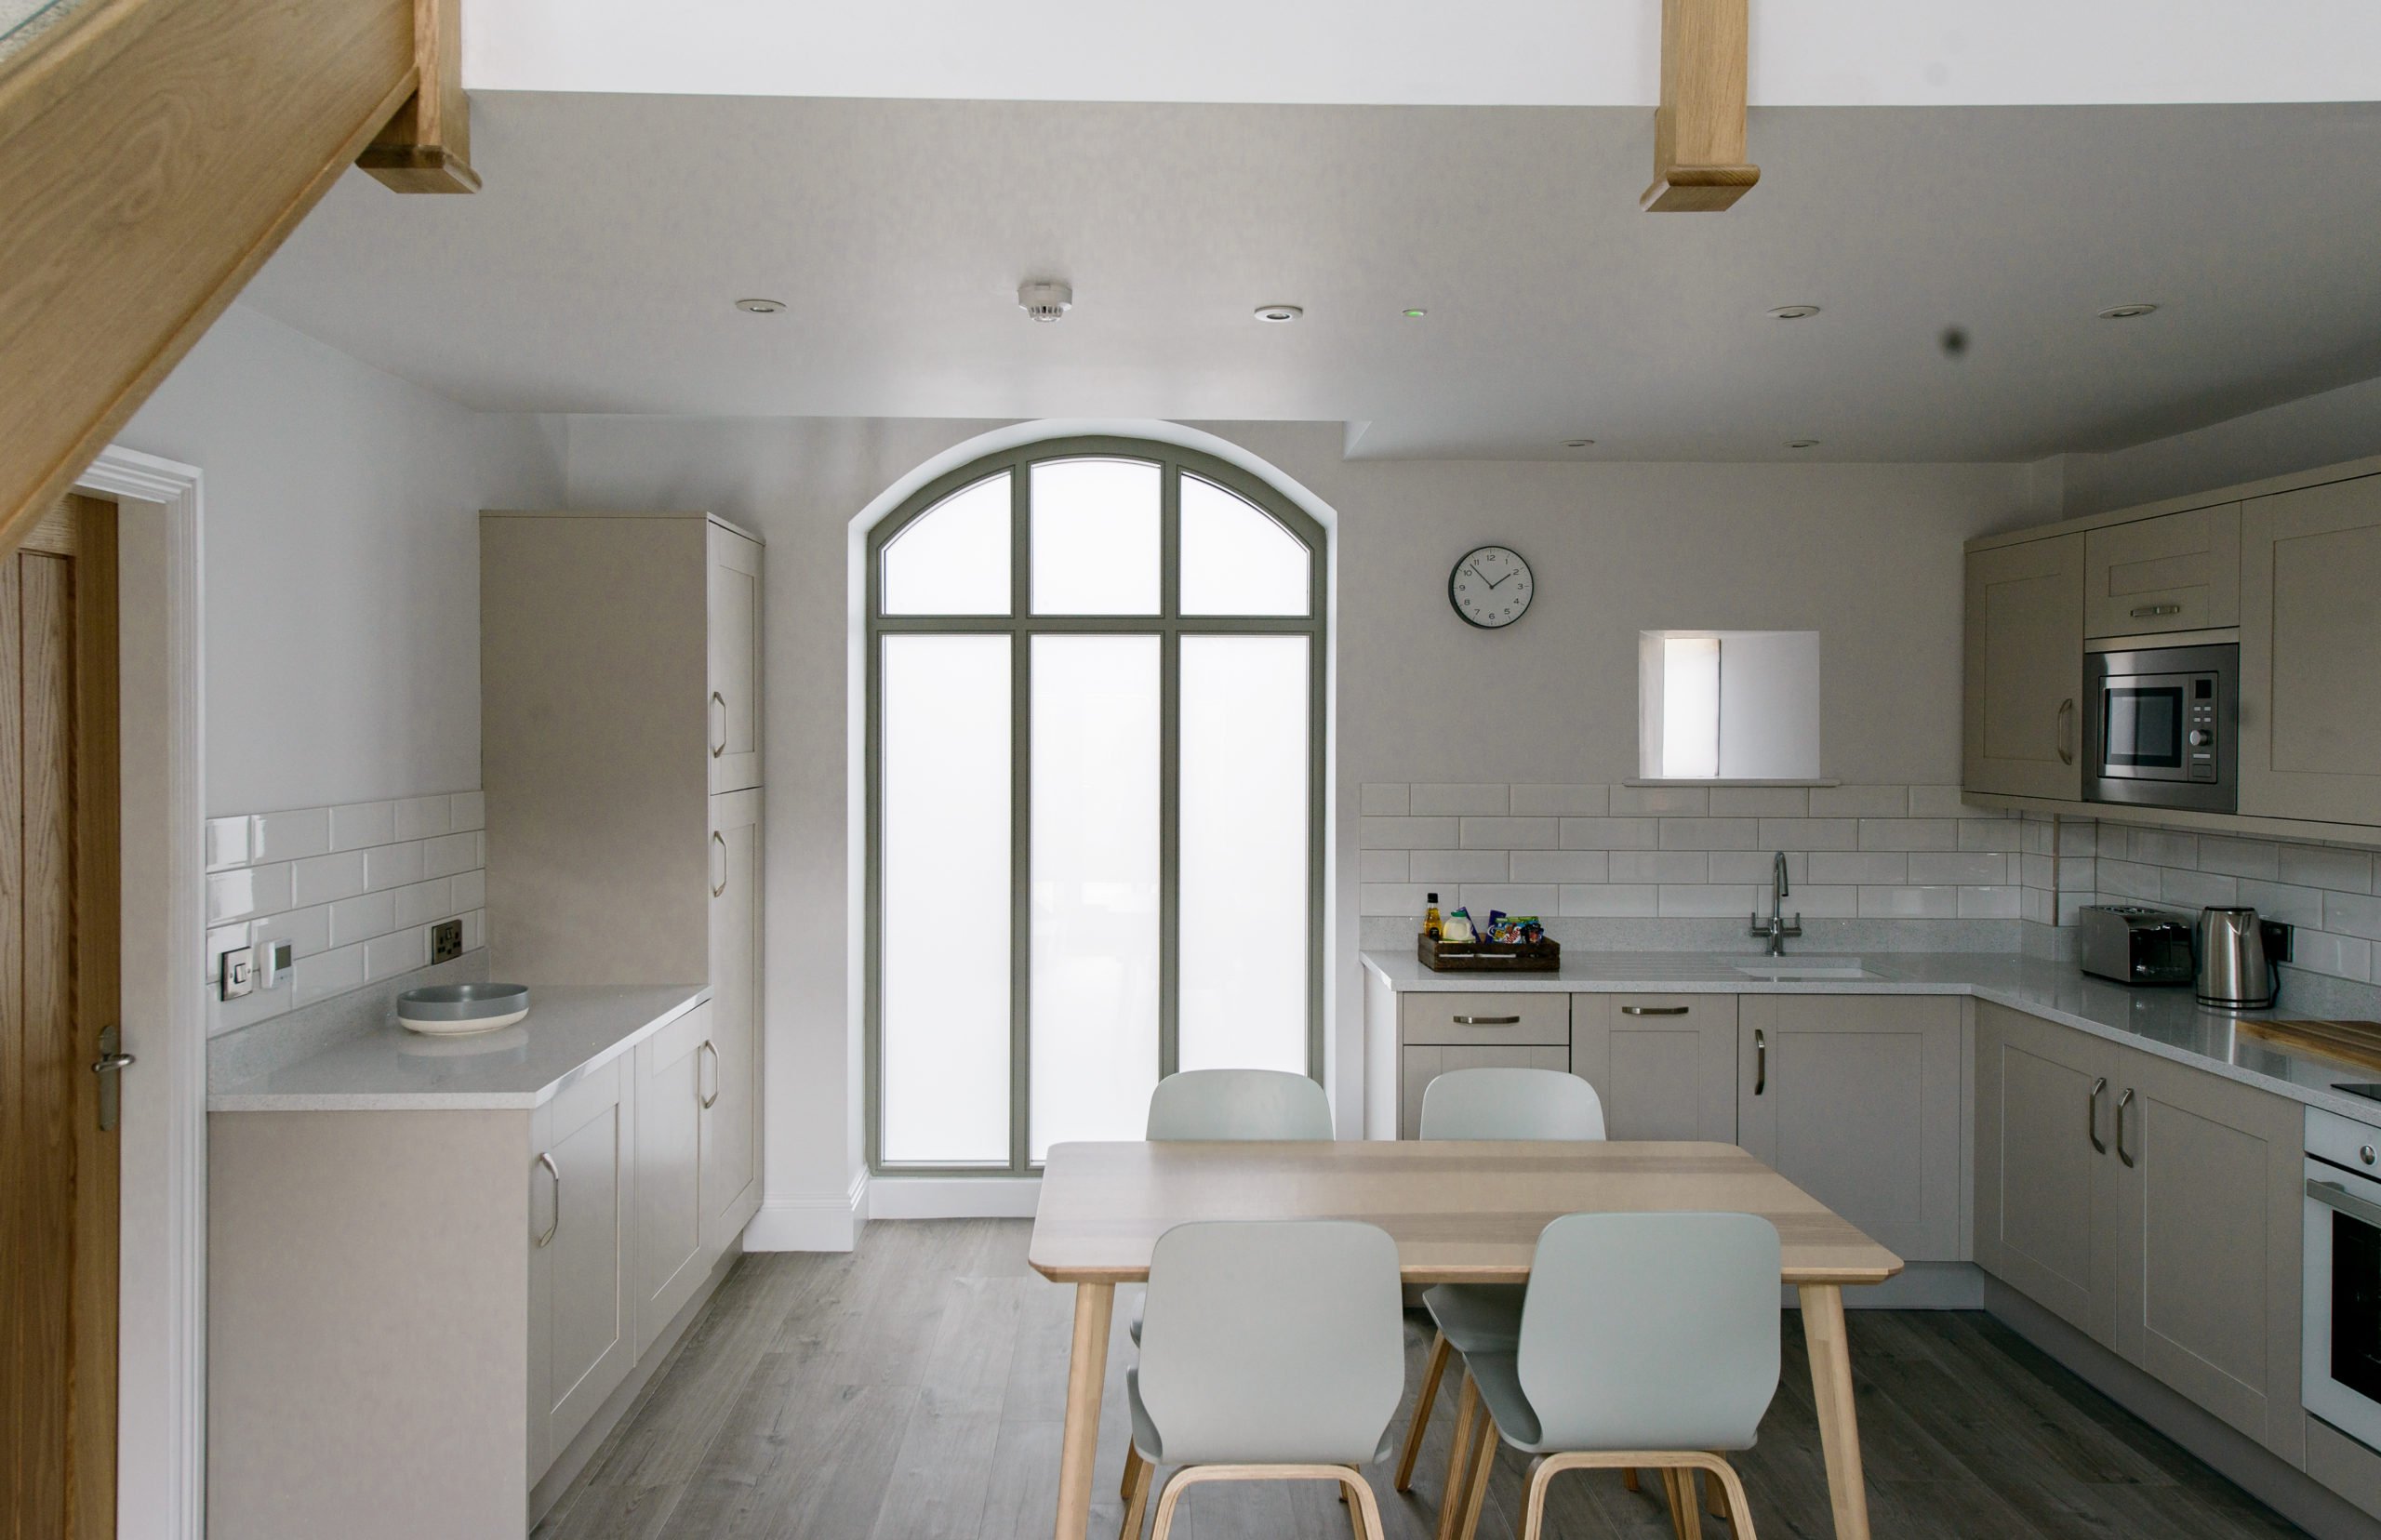 Accessible, homely kitchen area